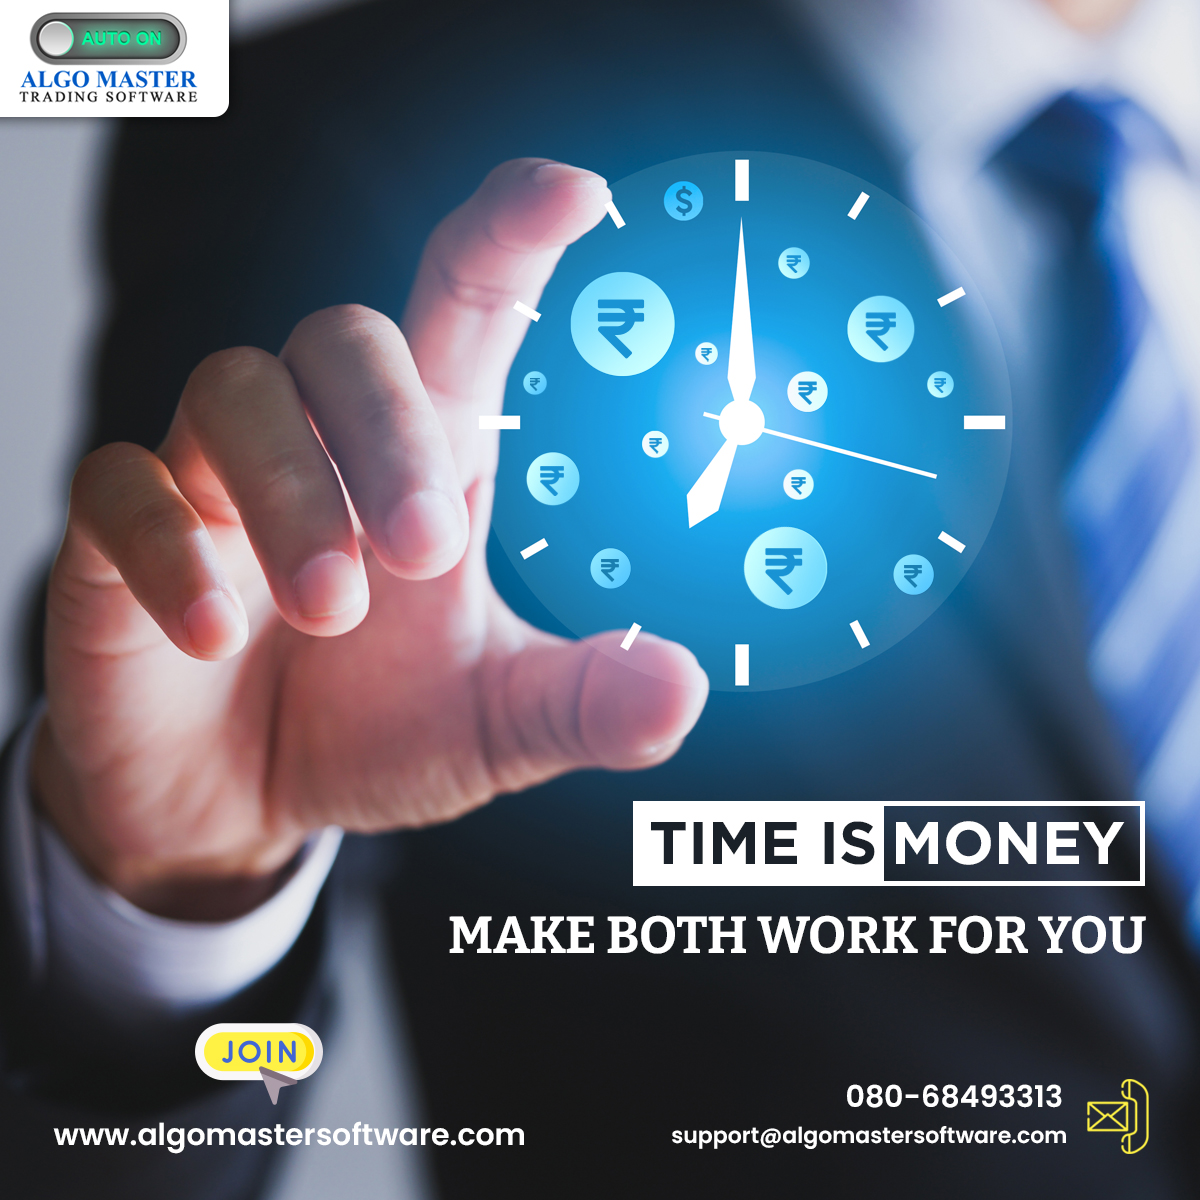 Time is money make both work for you with algo trading!  Join the revolution and unlock the power of speed to maximize your earning potential like never before!!
Website: algomastersoftware.com/stock-trading-…
Please email us at: india@algomastersoftware.com
#AutomatedTrading #ManualTrading